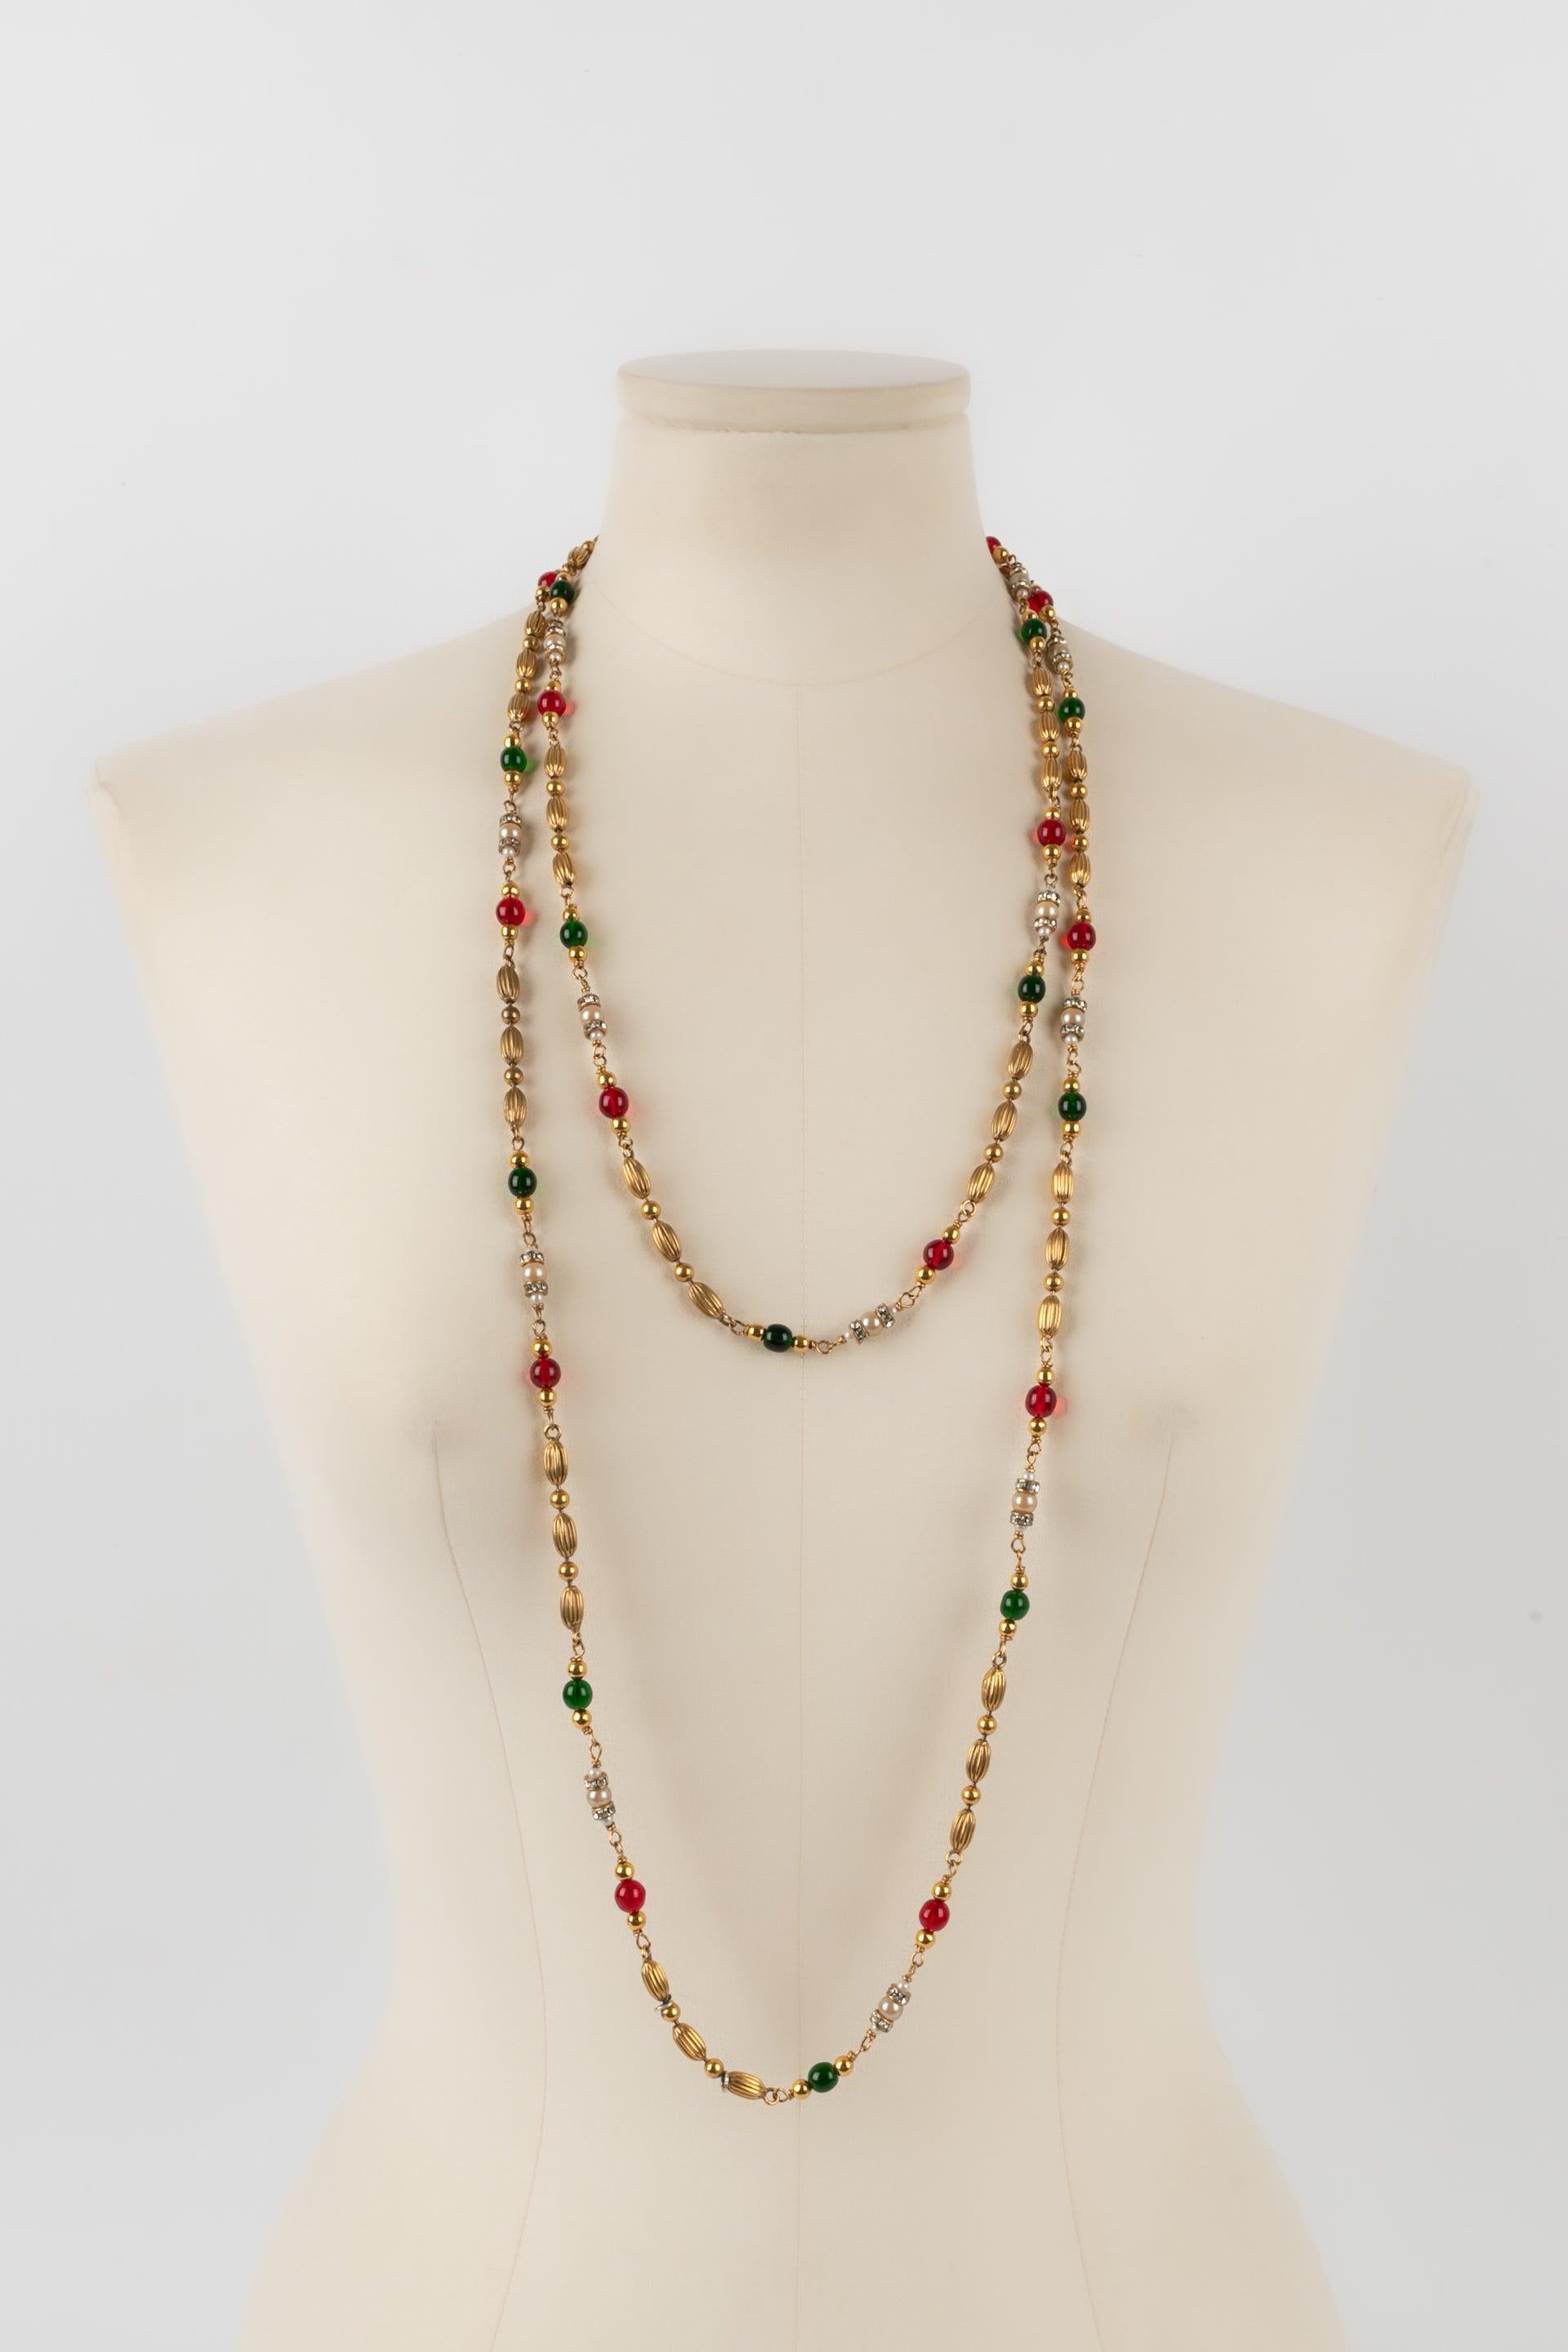 Chanel - (Made in France) Golden metal sautoir with metallic pearls, rhinestone rings, and glass pearls in red, green, and pearly tones. Jewelry from the 1960s.

Additional information:
Condition: Very good condition
Dimensions: Length: 165